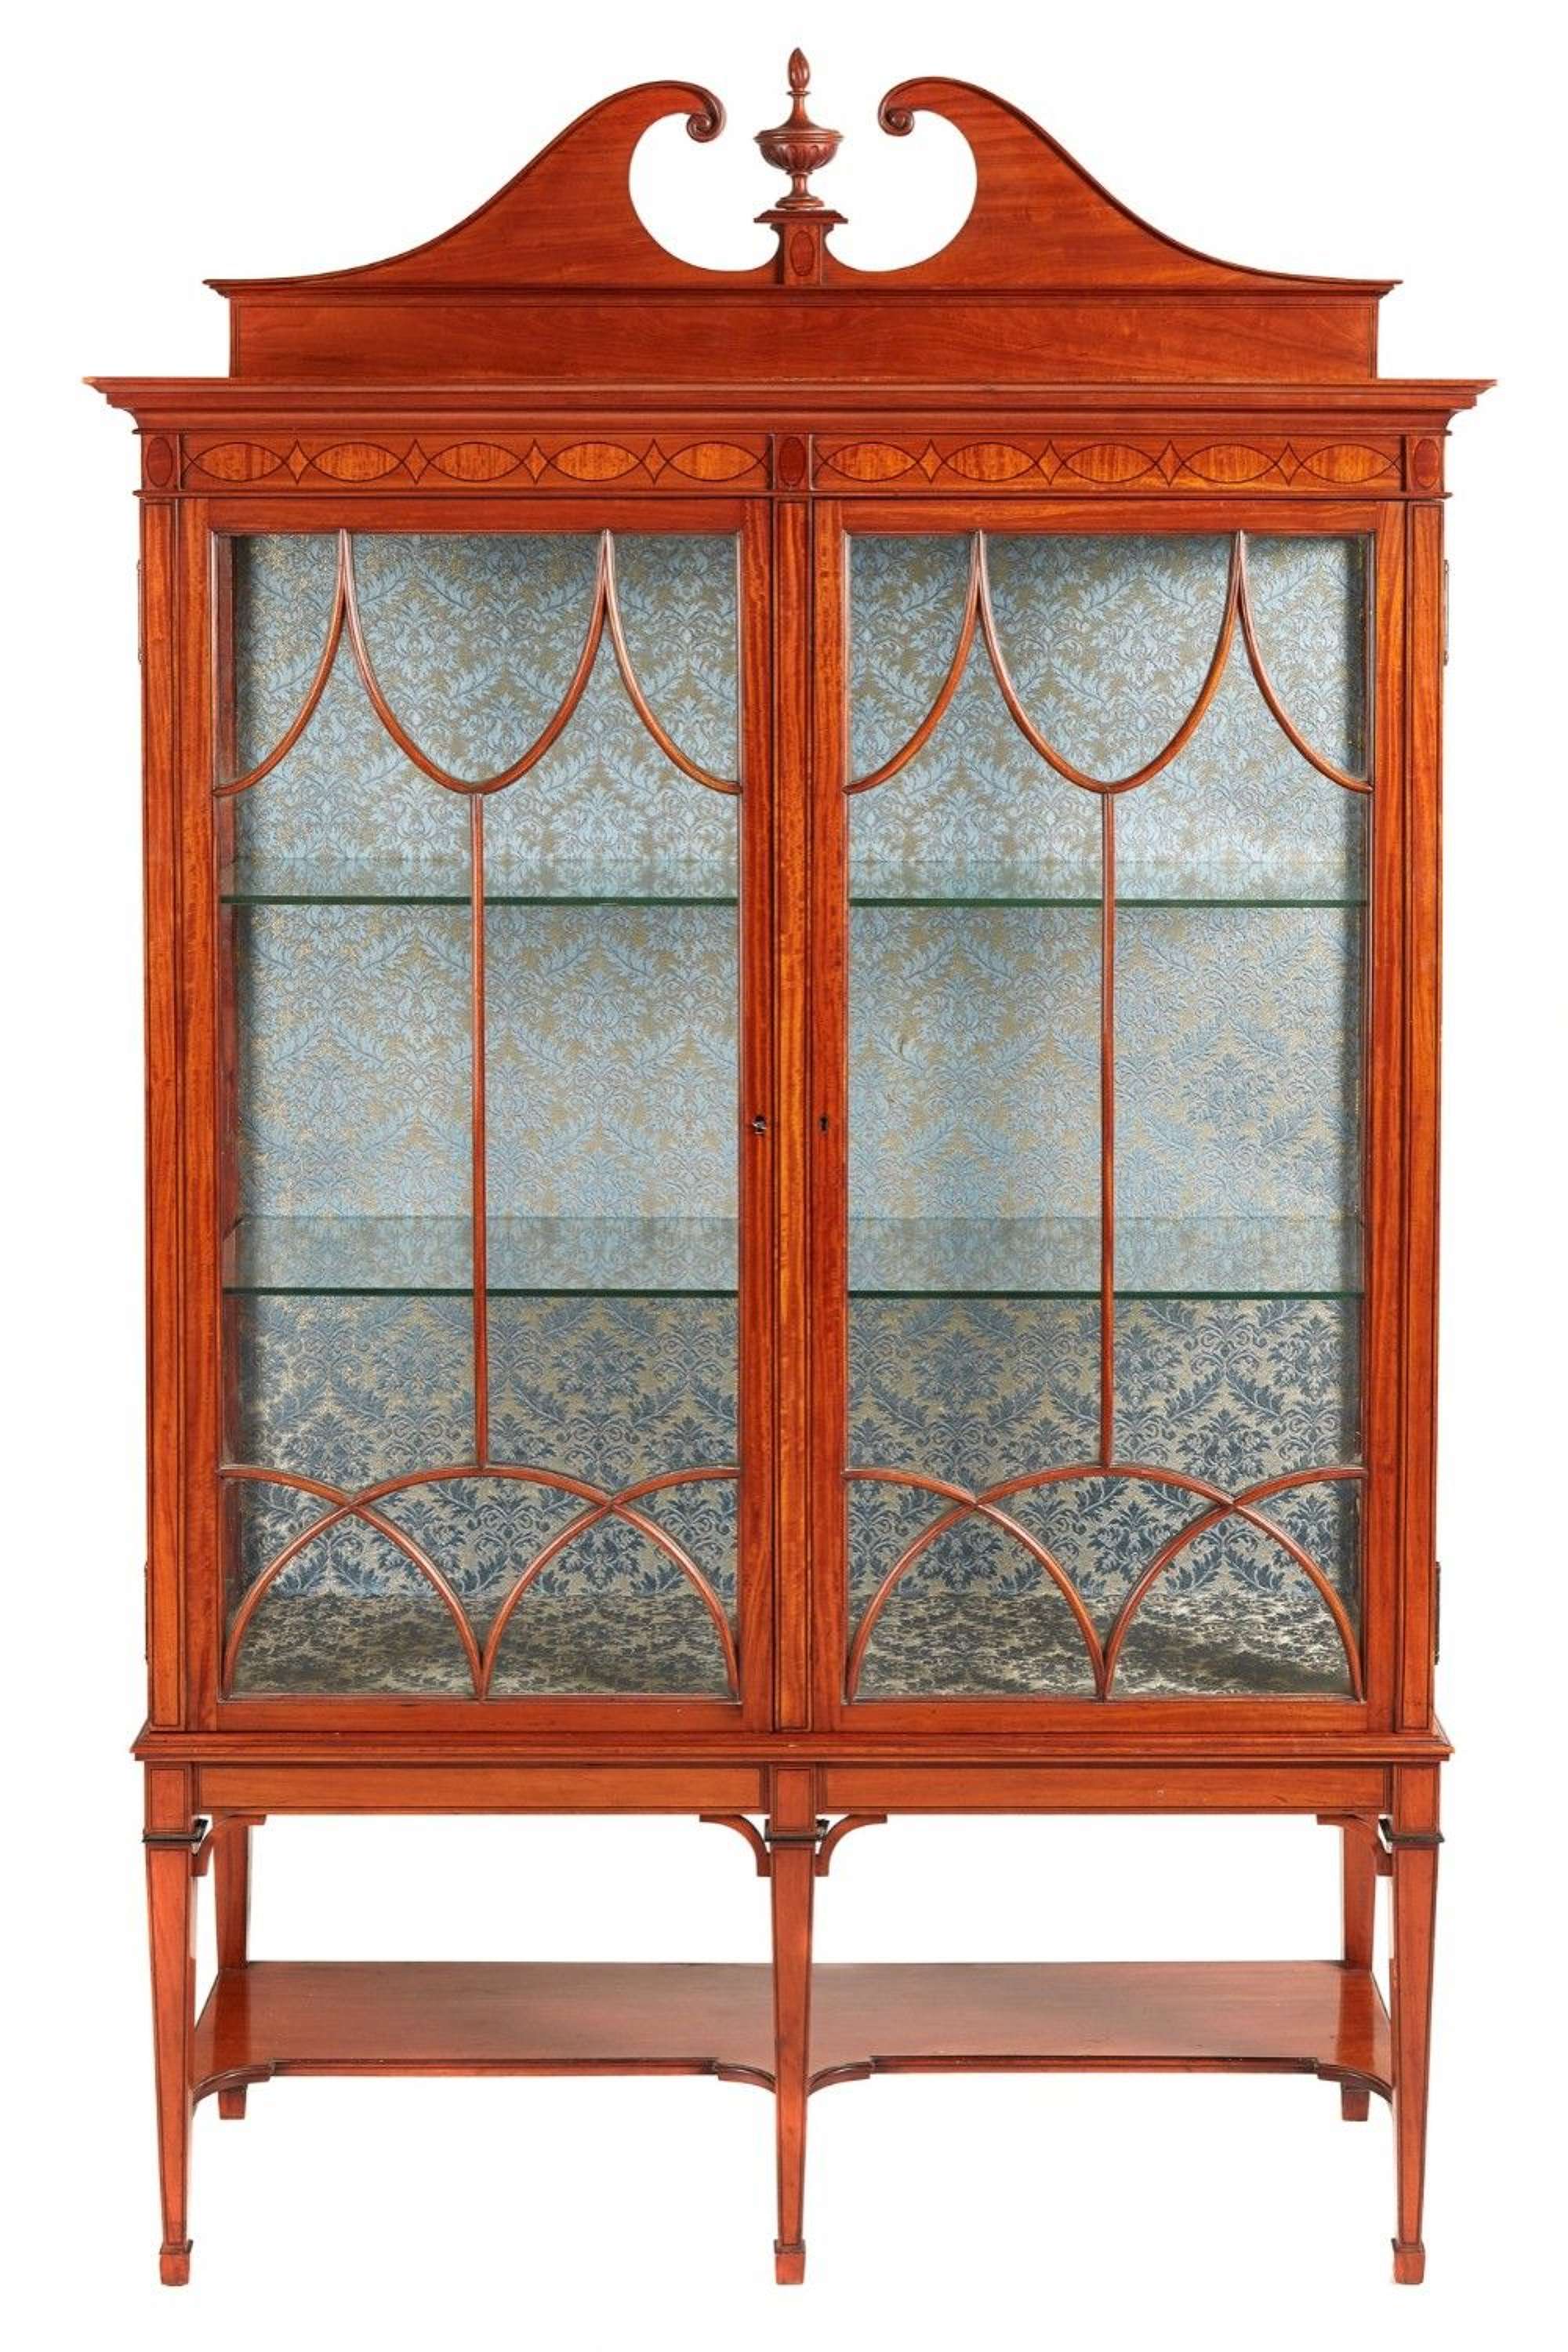 A Fine And Outstanding Quality Inlaid Satinwood Display Cabinet